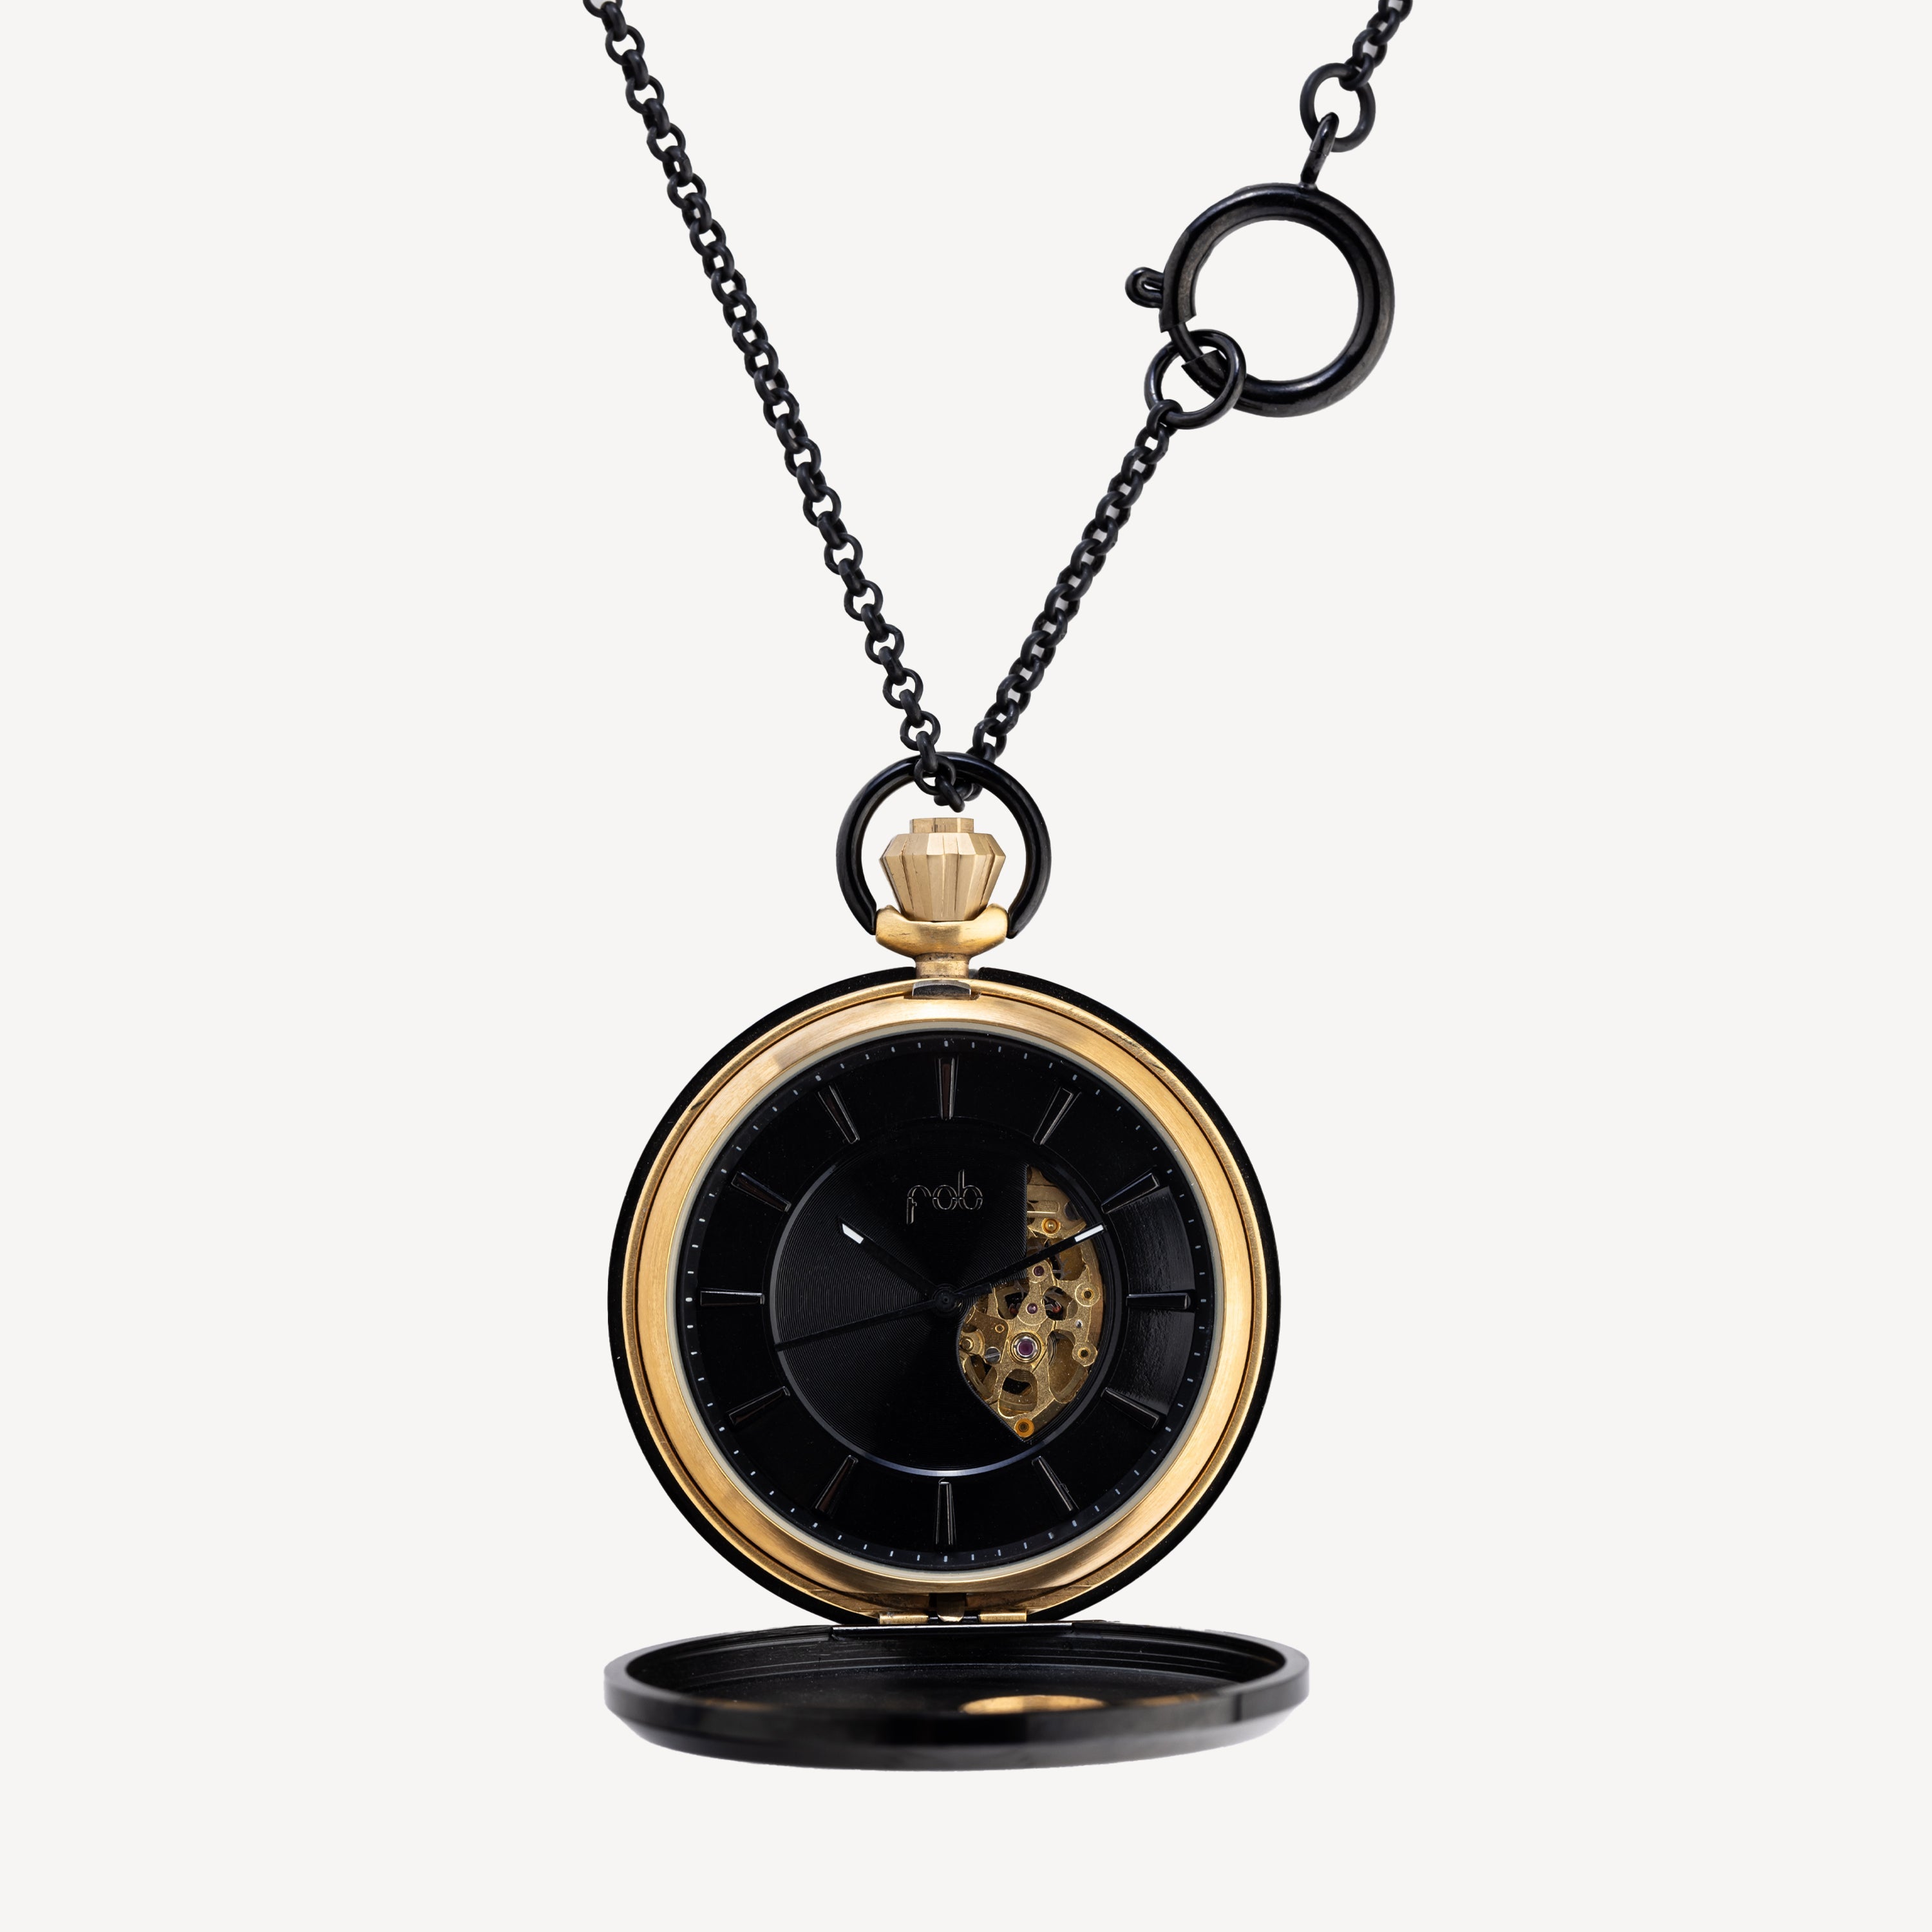 Limited Edition Pocket Watch